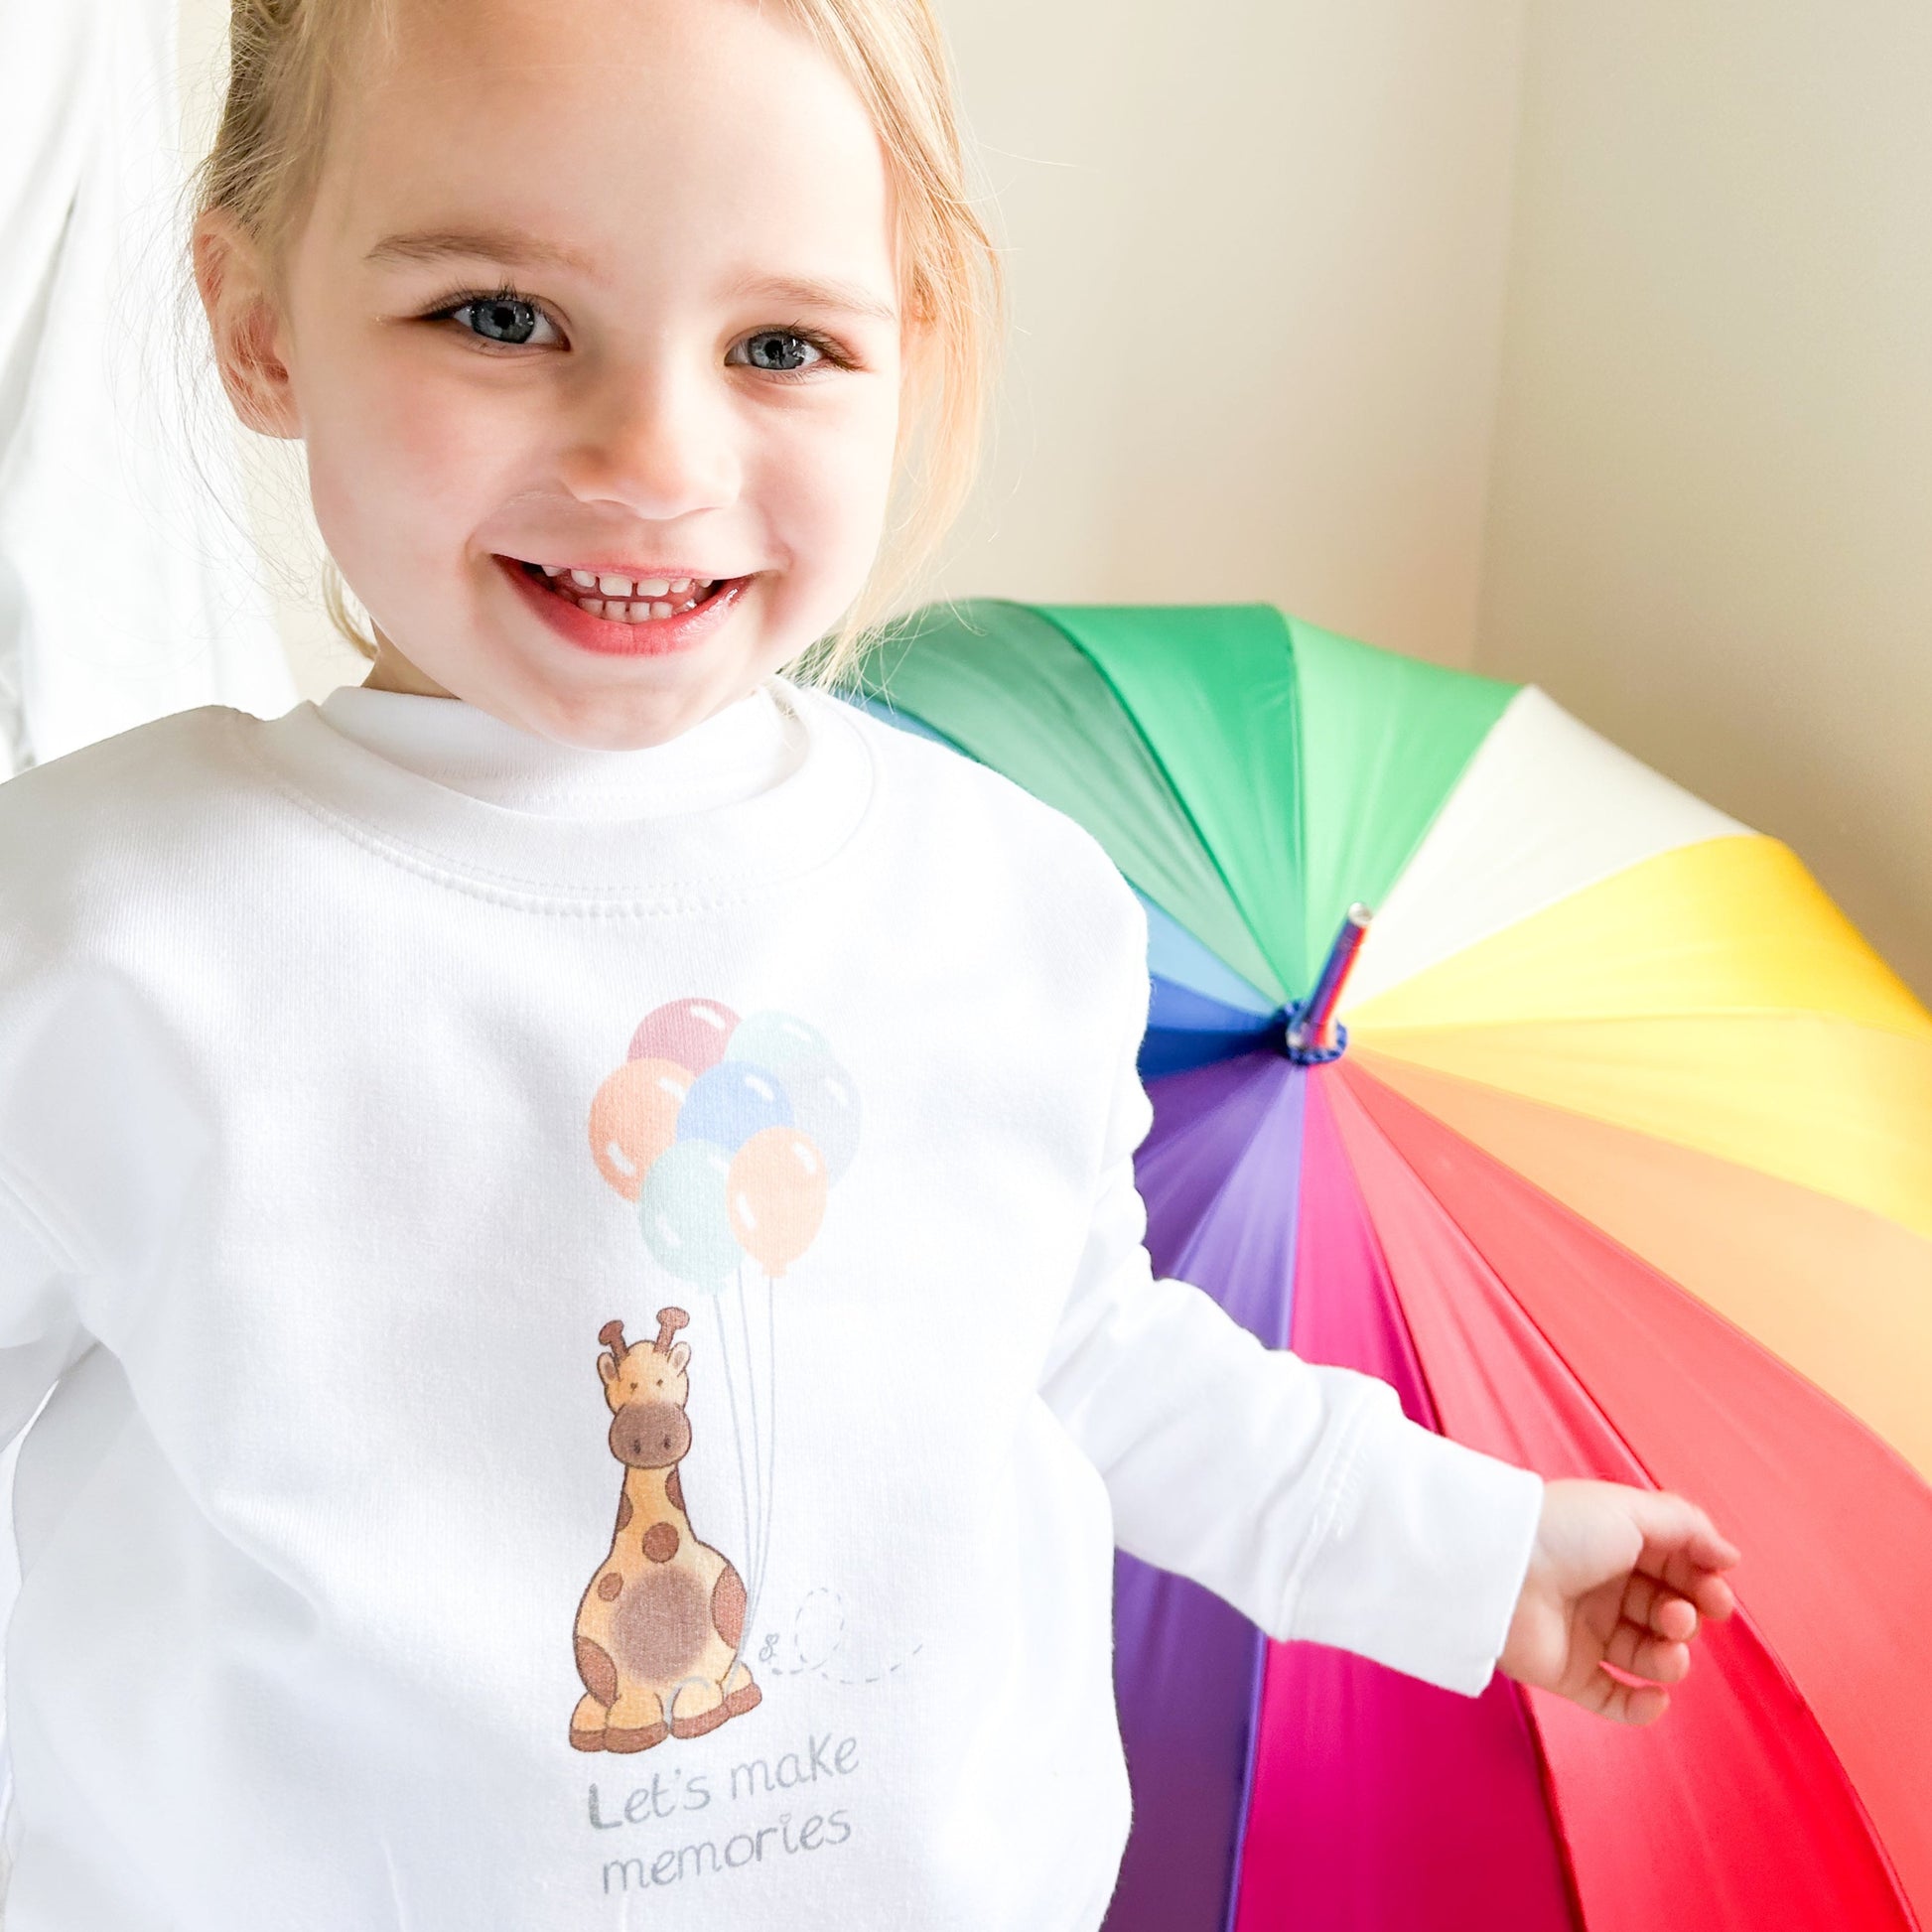 a girl smiling with a colourful umbrella and white sweatshirt on with cute giraffe and balloons design with "let's make memories" quote